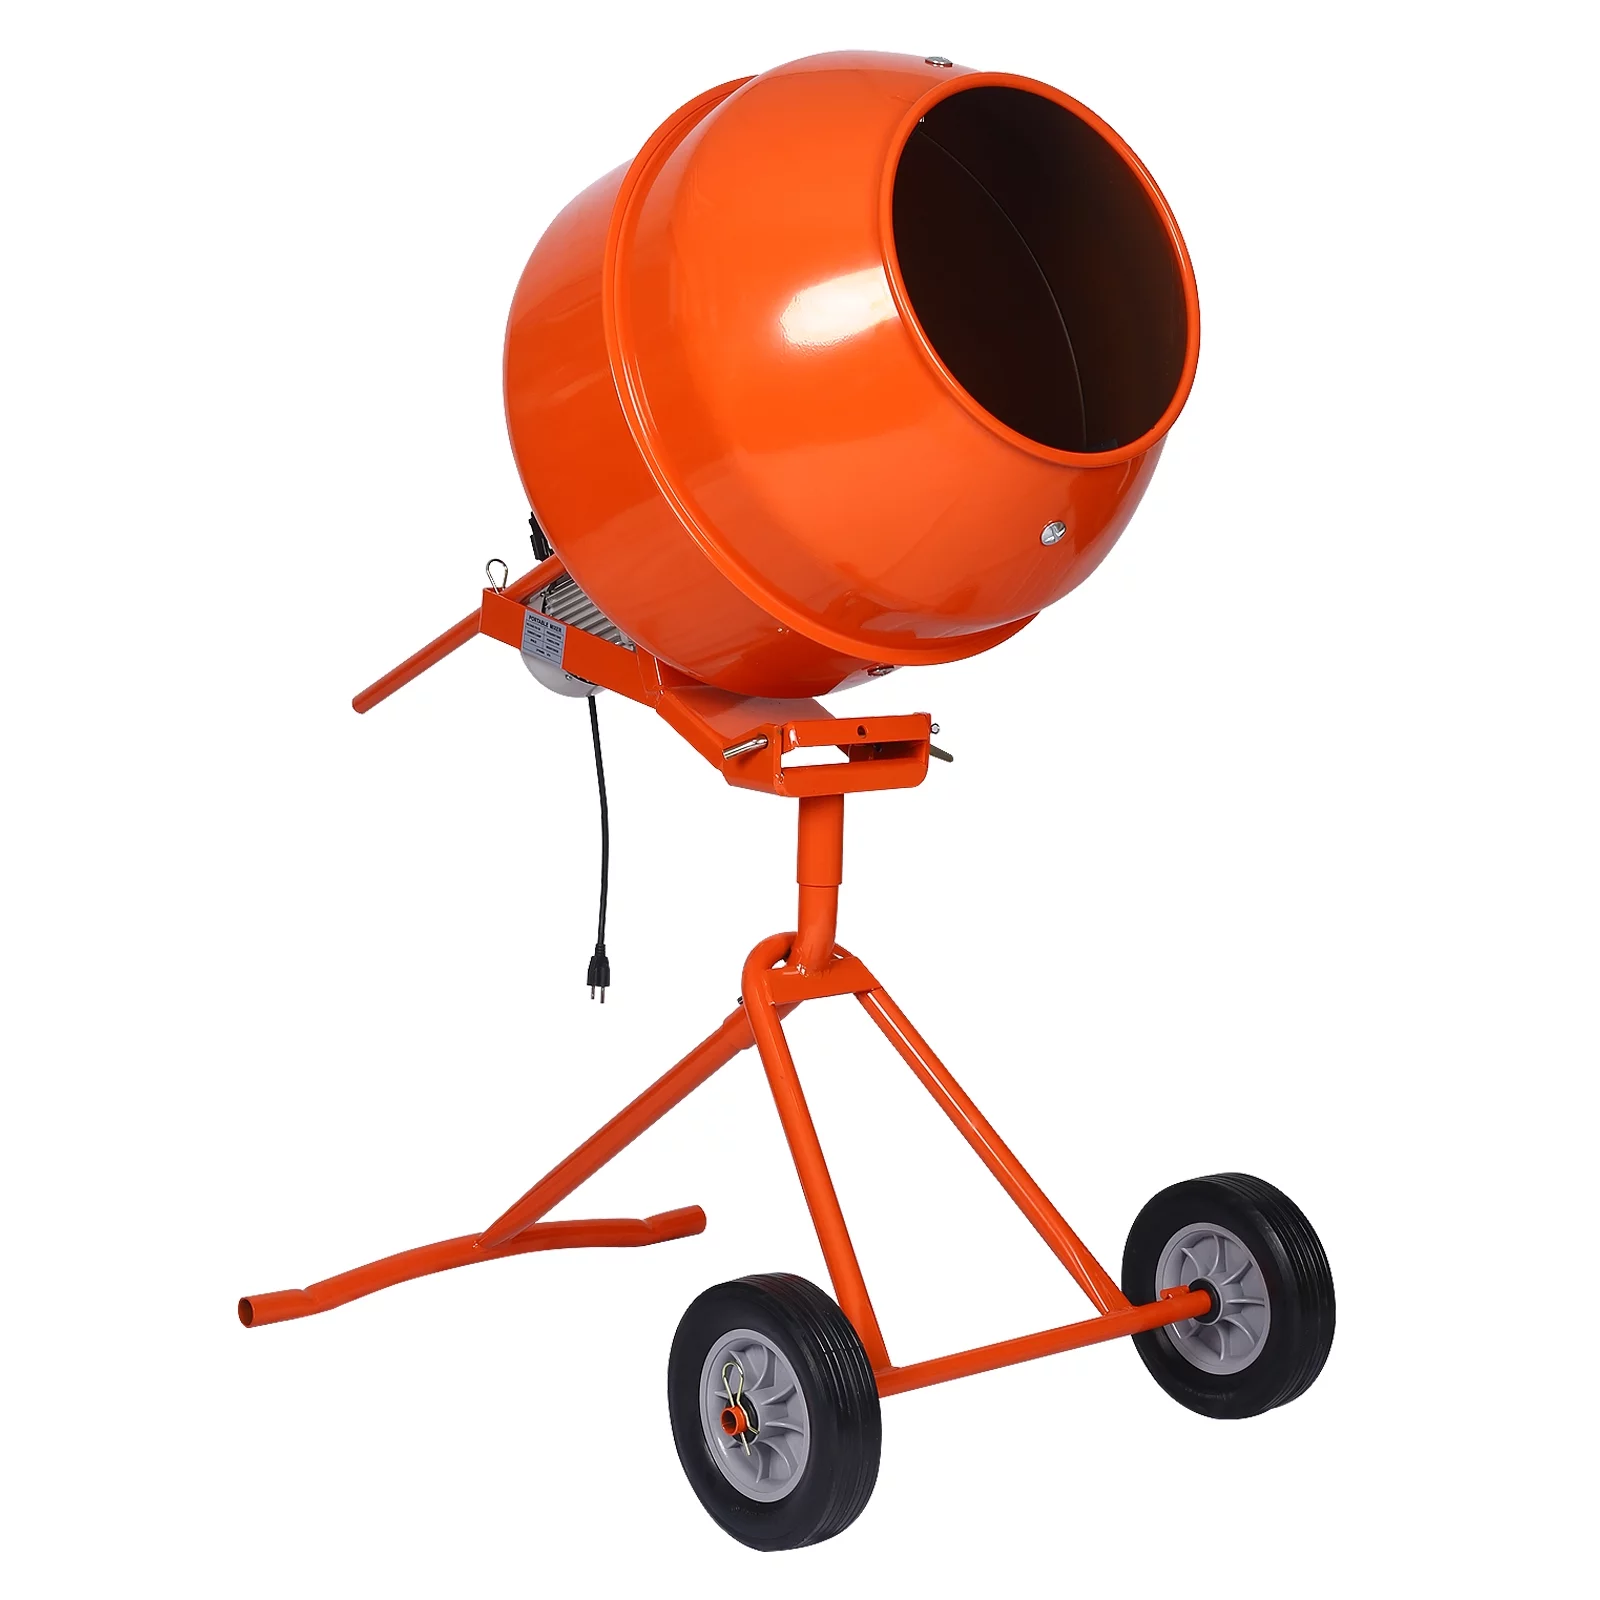 Electric concrete mixer with discounted price tag